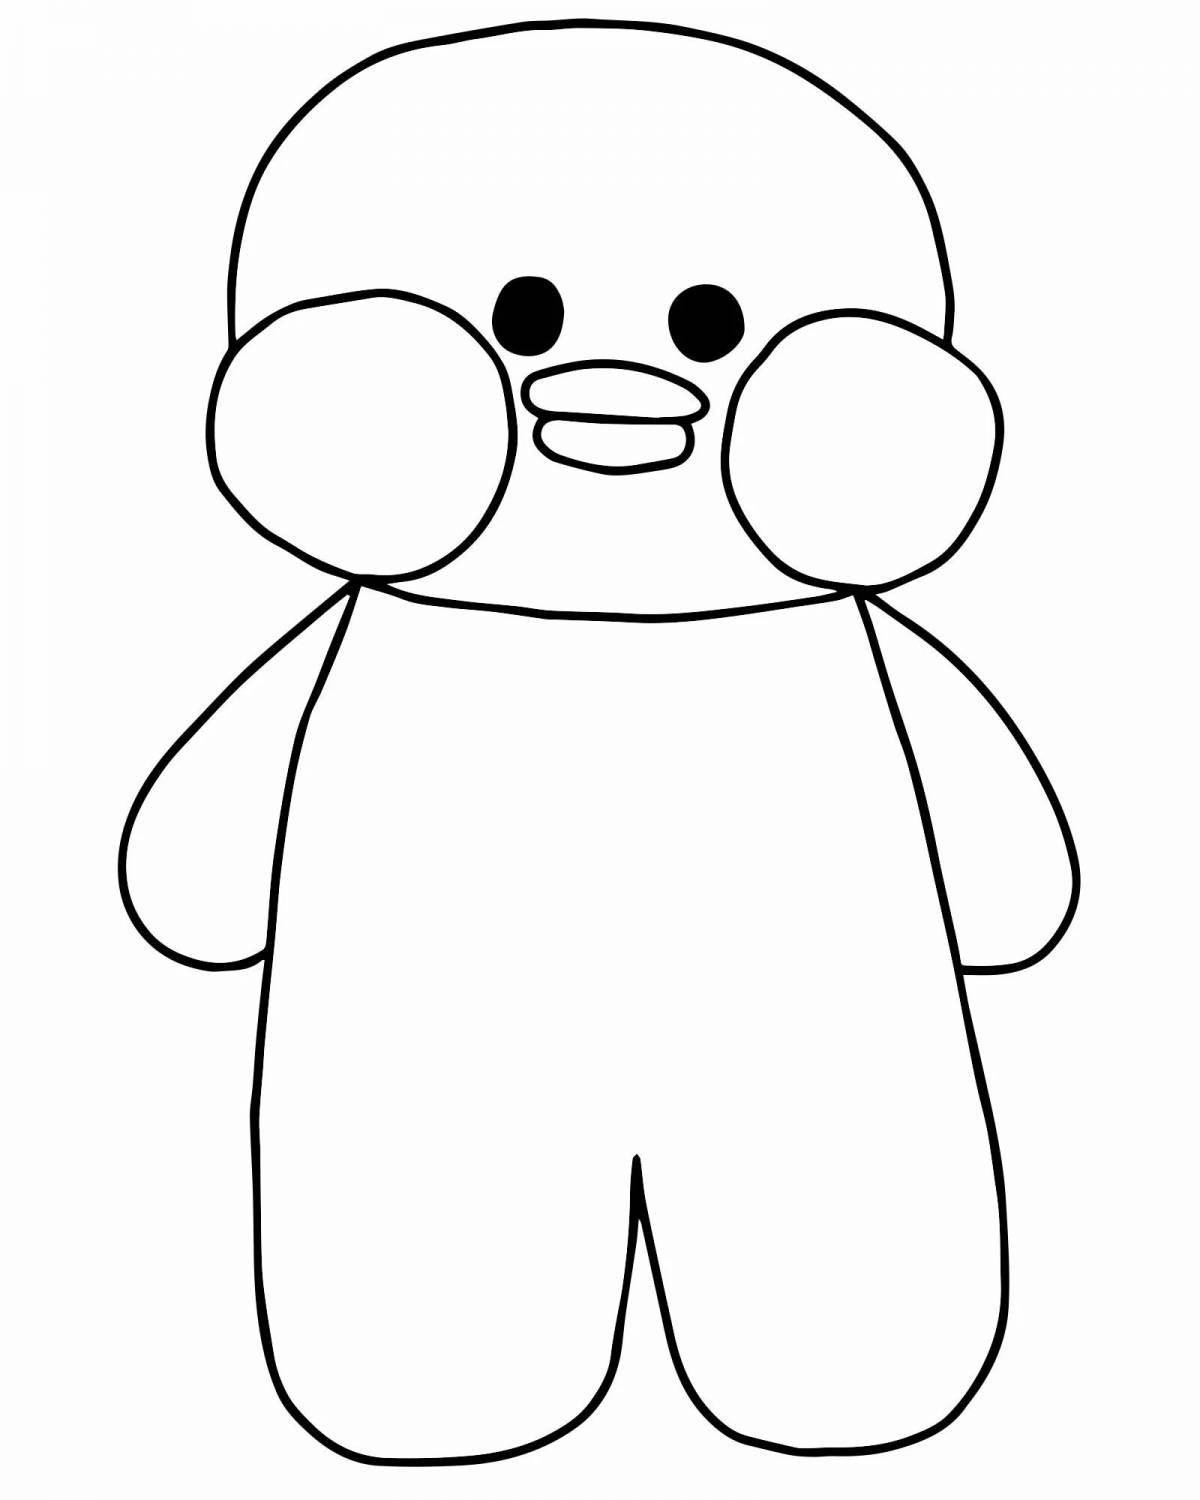 Lalafanfan adorable duck coloring page